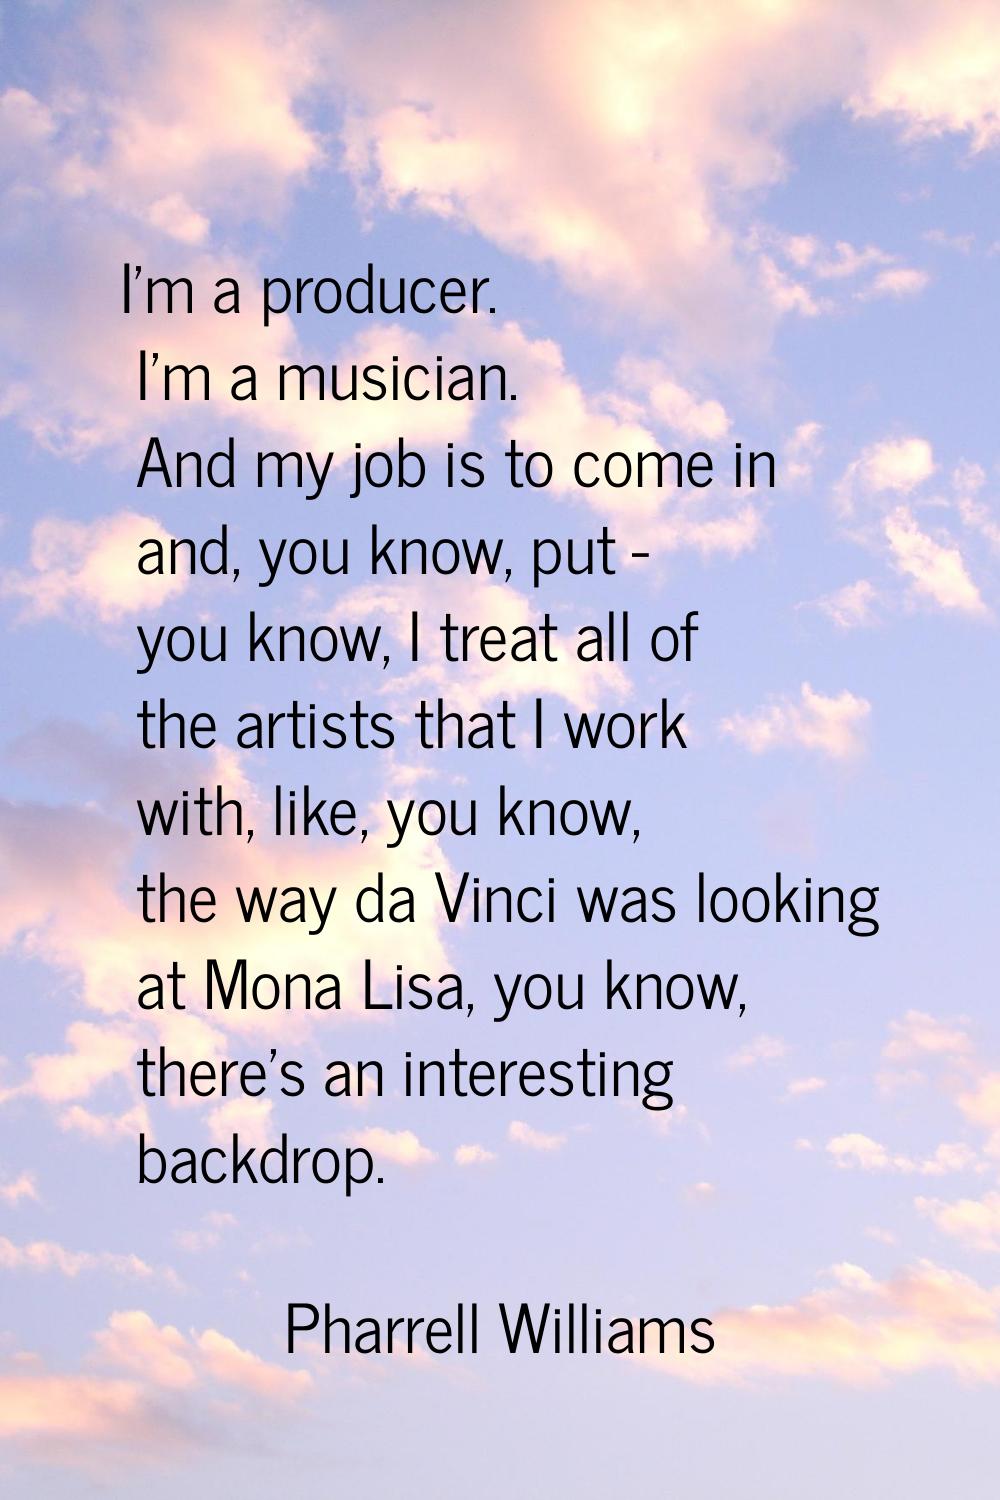 I'm a producer. I'm a musician. And my job is to come in and, you know, put - you know, I treat all